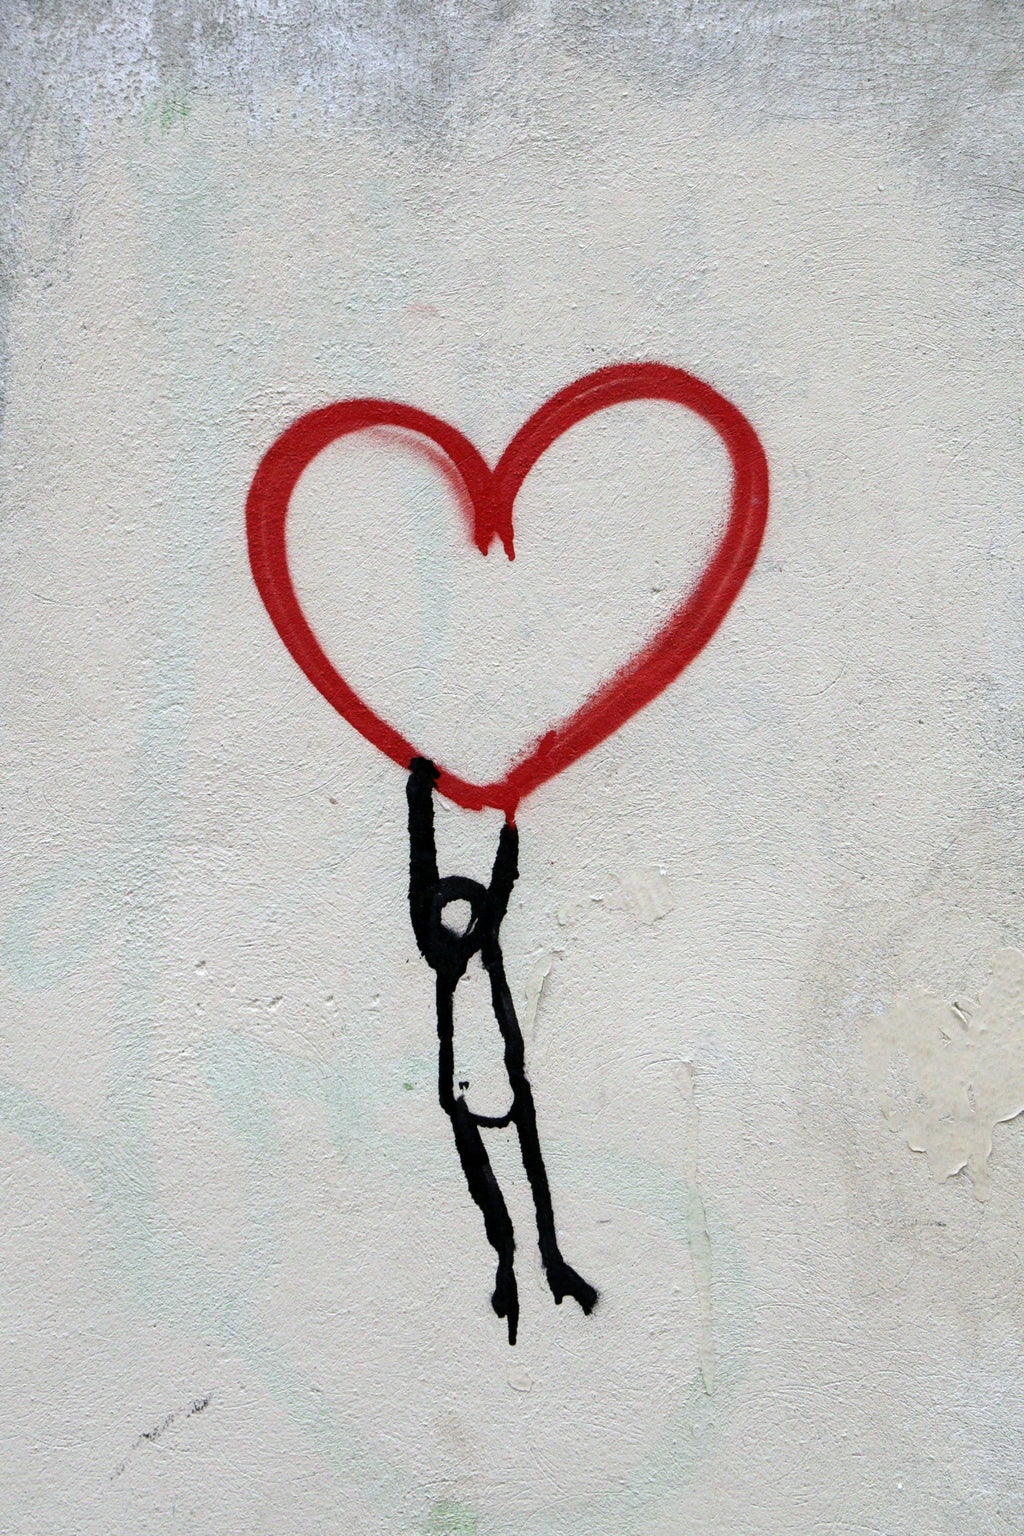 Stick figure drawing holding onto heart